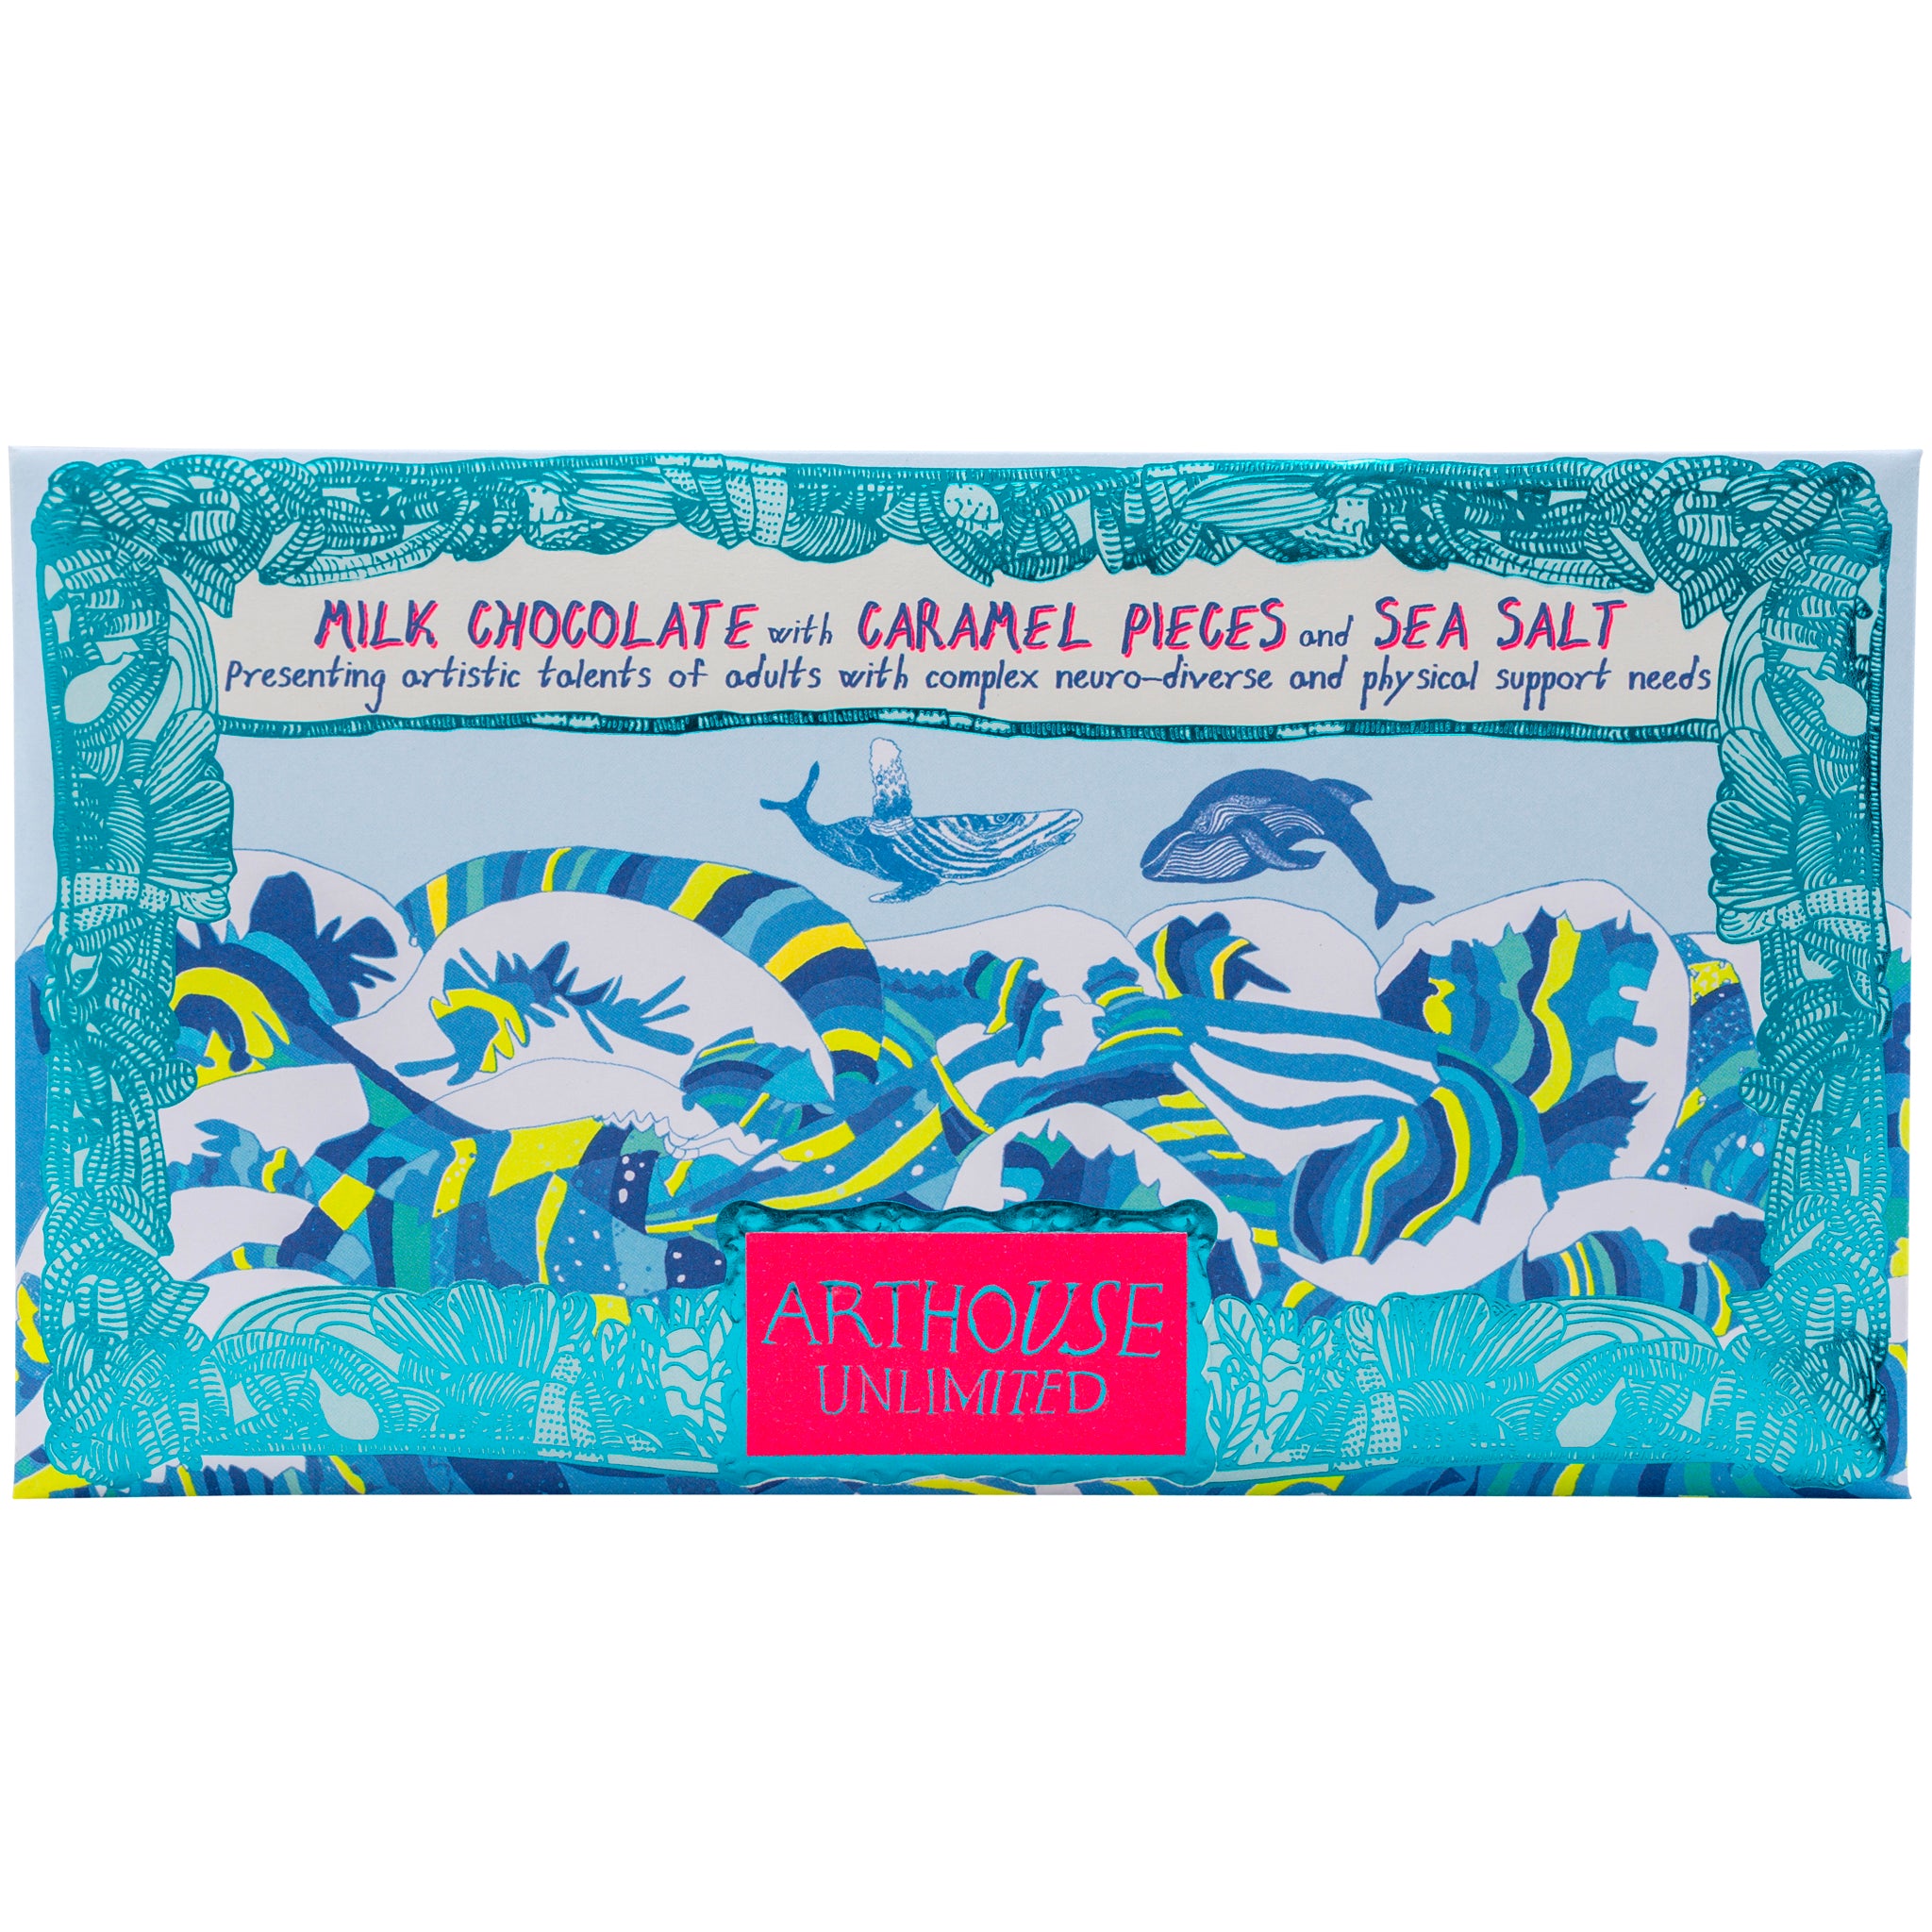 Blue foiled packet of Swim with Whales, Milk Chocolate Bar with Caramel & Sea Salt